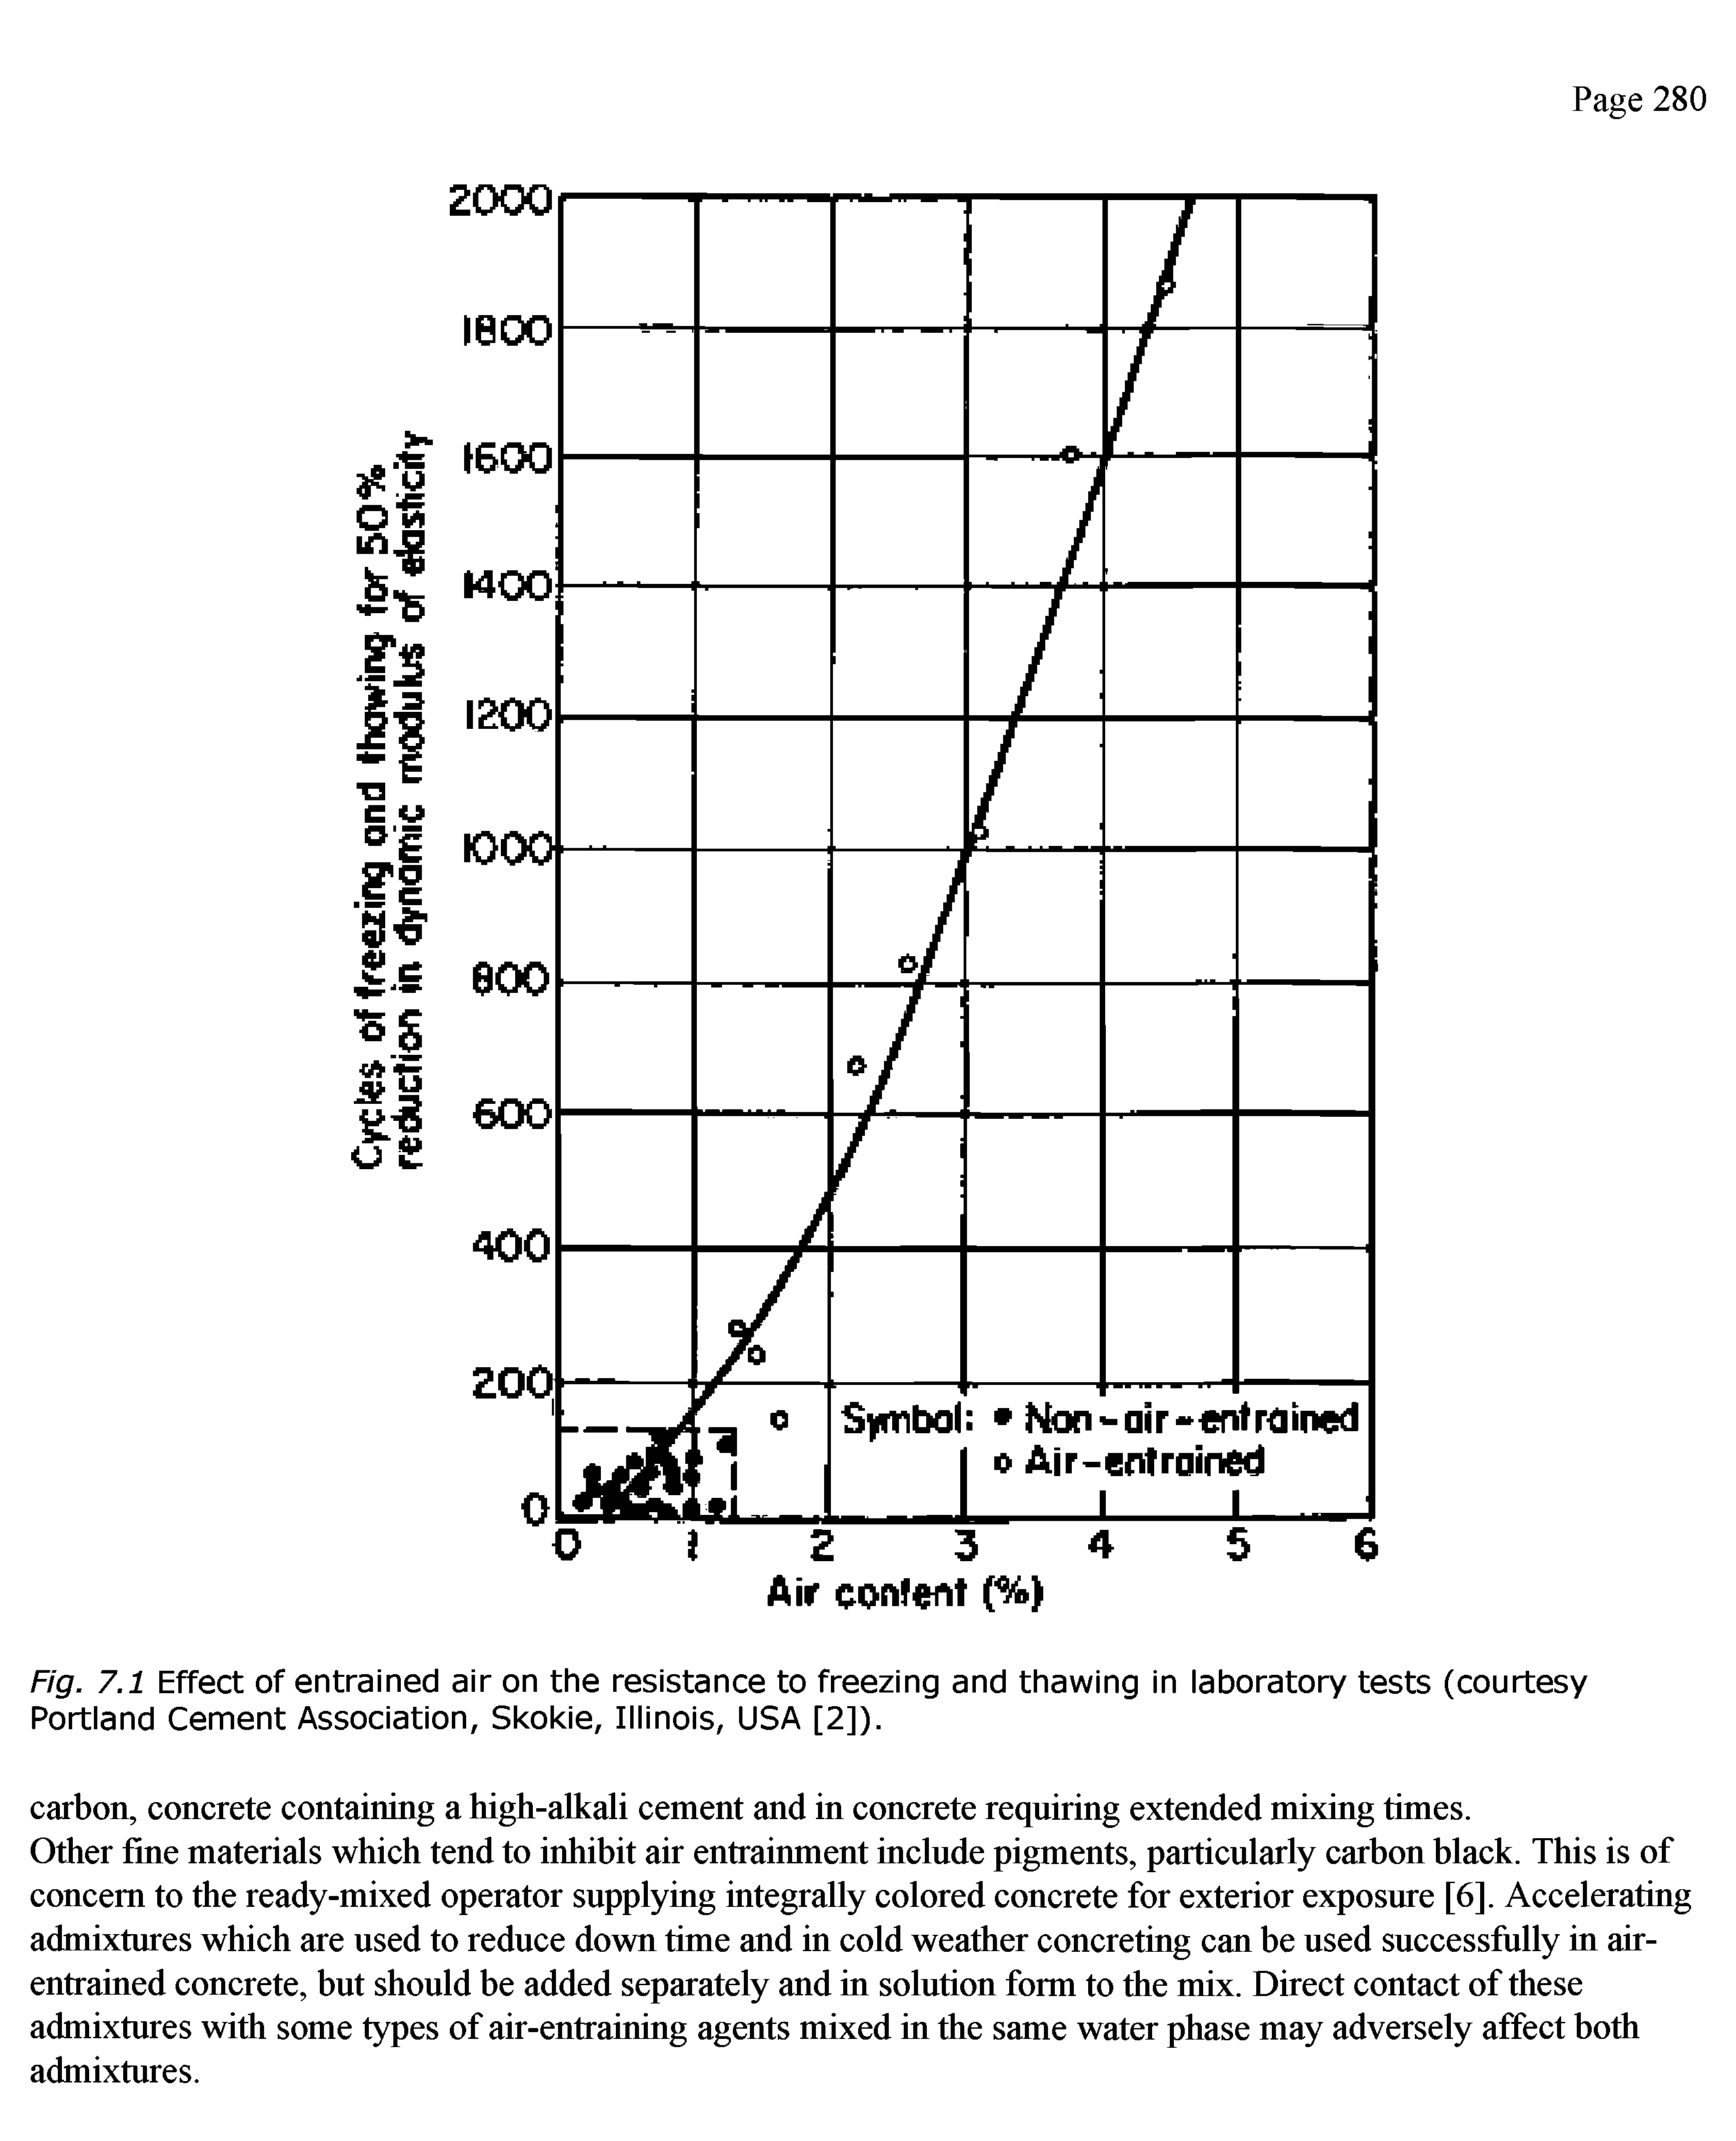 Fig. 7.1 Effect of entrained air on the resistance to freezing and thawing in laboratory tests (courtesy Portland Cement Association, Skokie, Illinois, USA [2]).